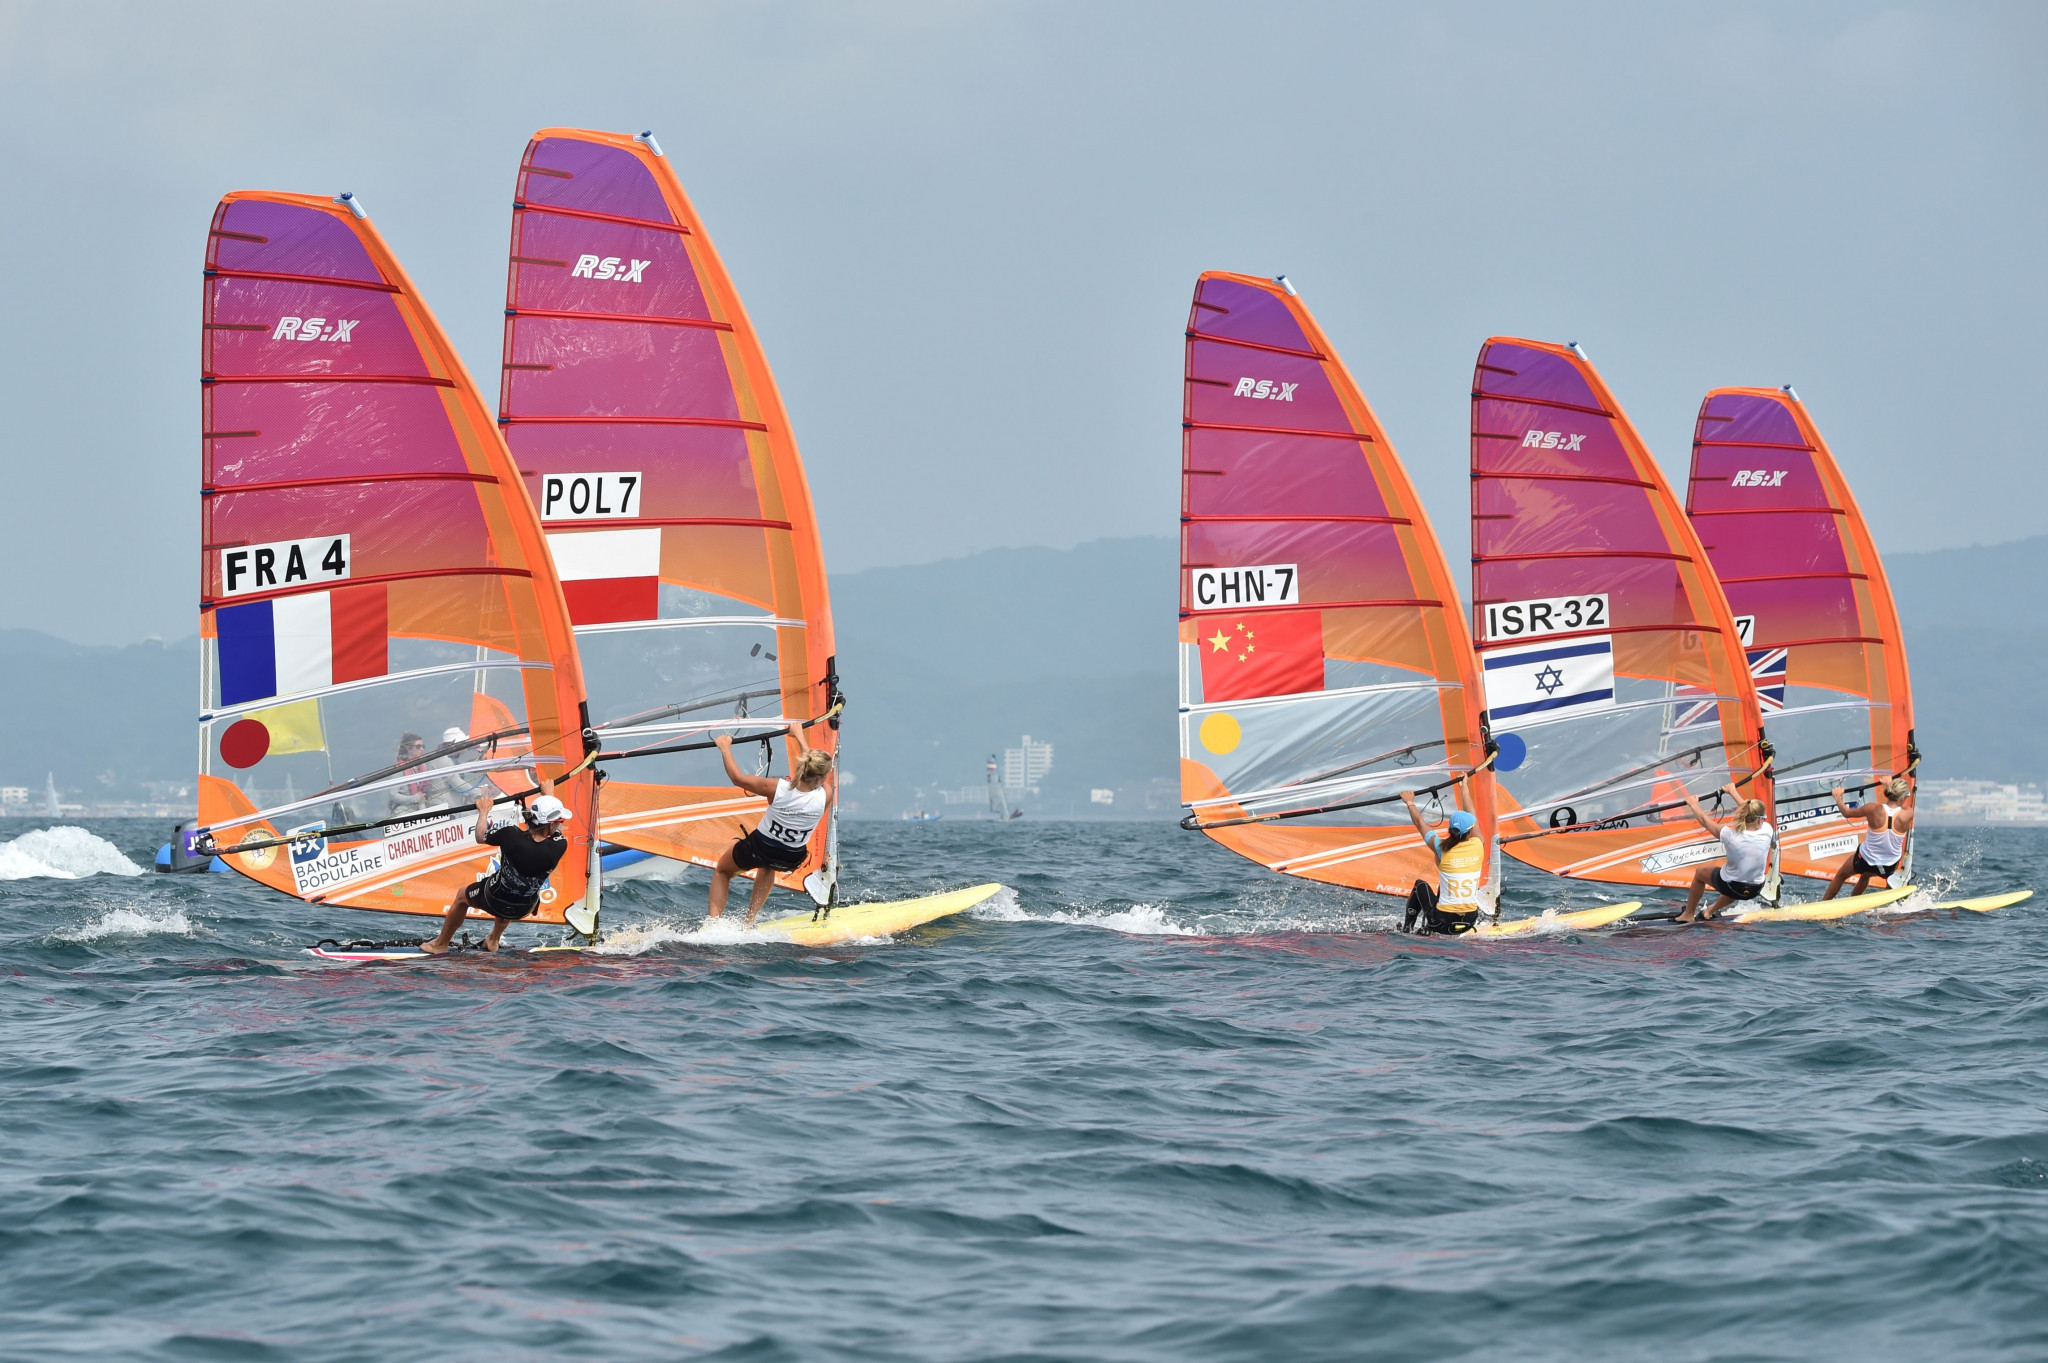 The RS:X is set to be dislodged as the equipment for Olympic windsurfing events ©Getty Images